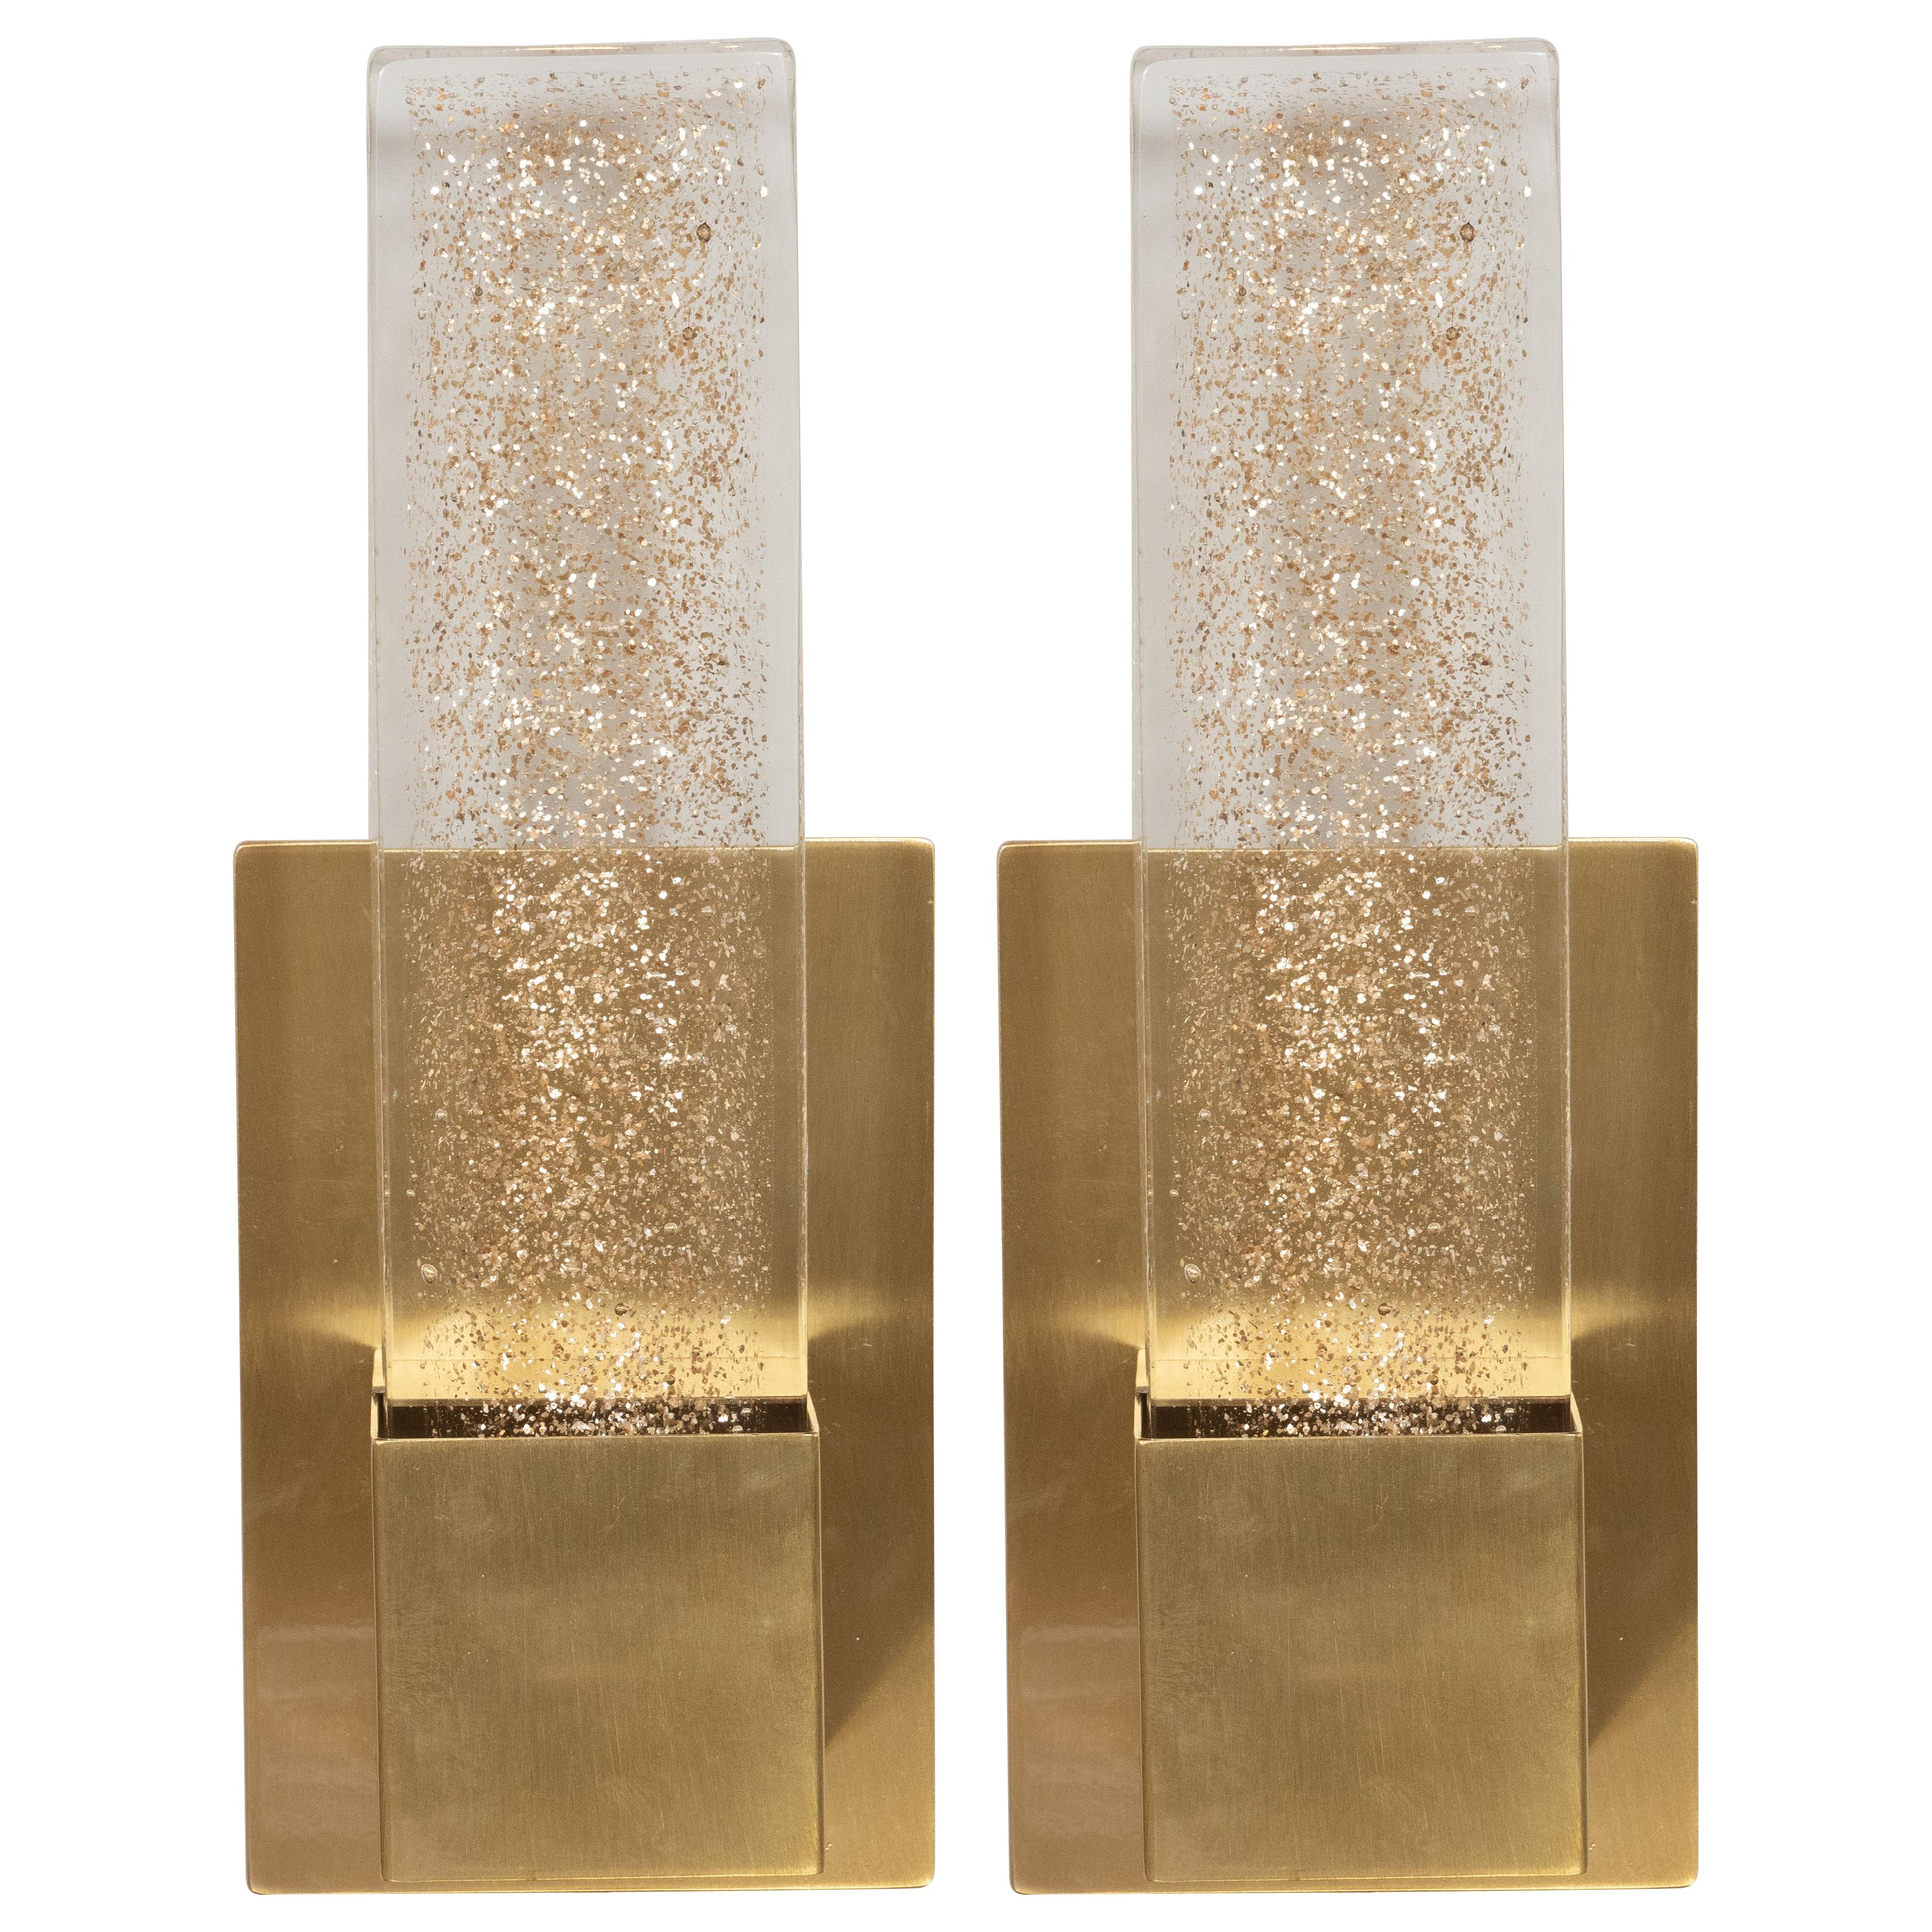 Pair of Handblown Murano Glass & Brushed Brass Sconces with 24-Karat Gold Flecks For Sale